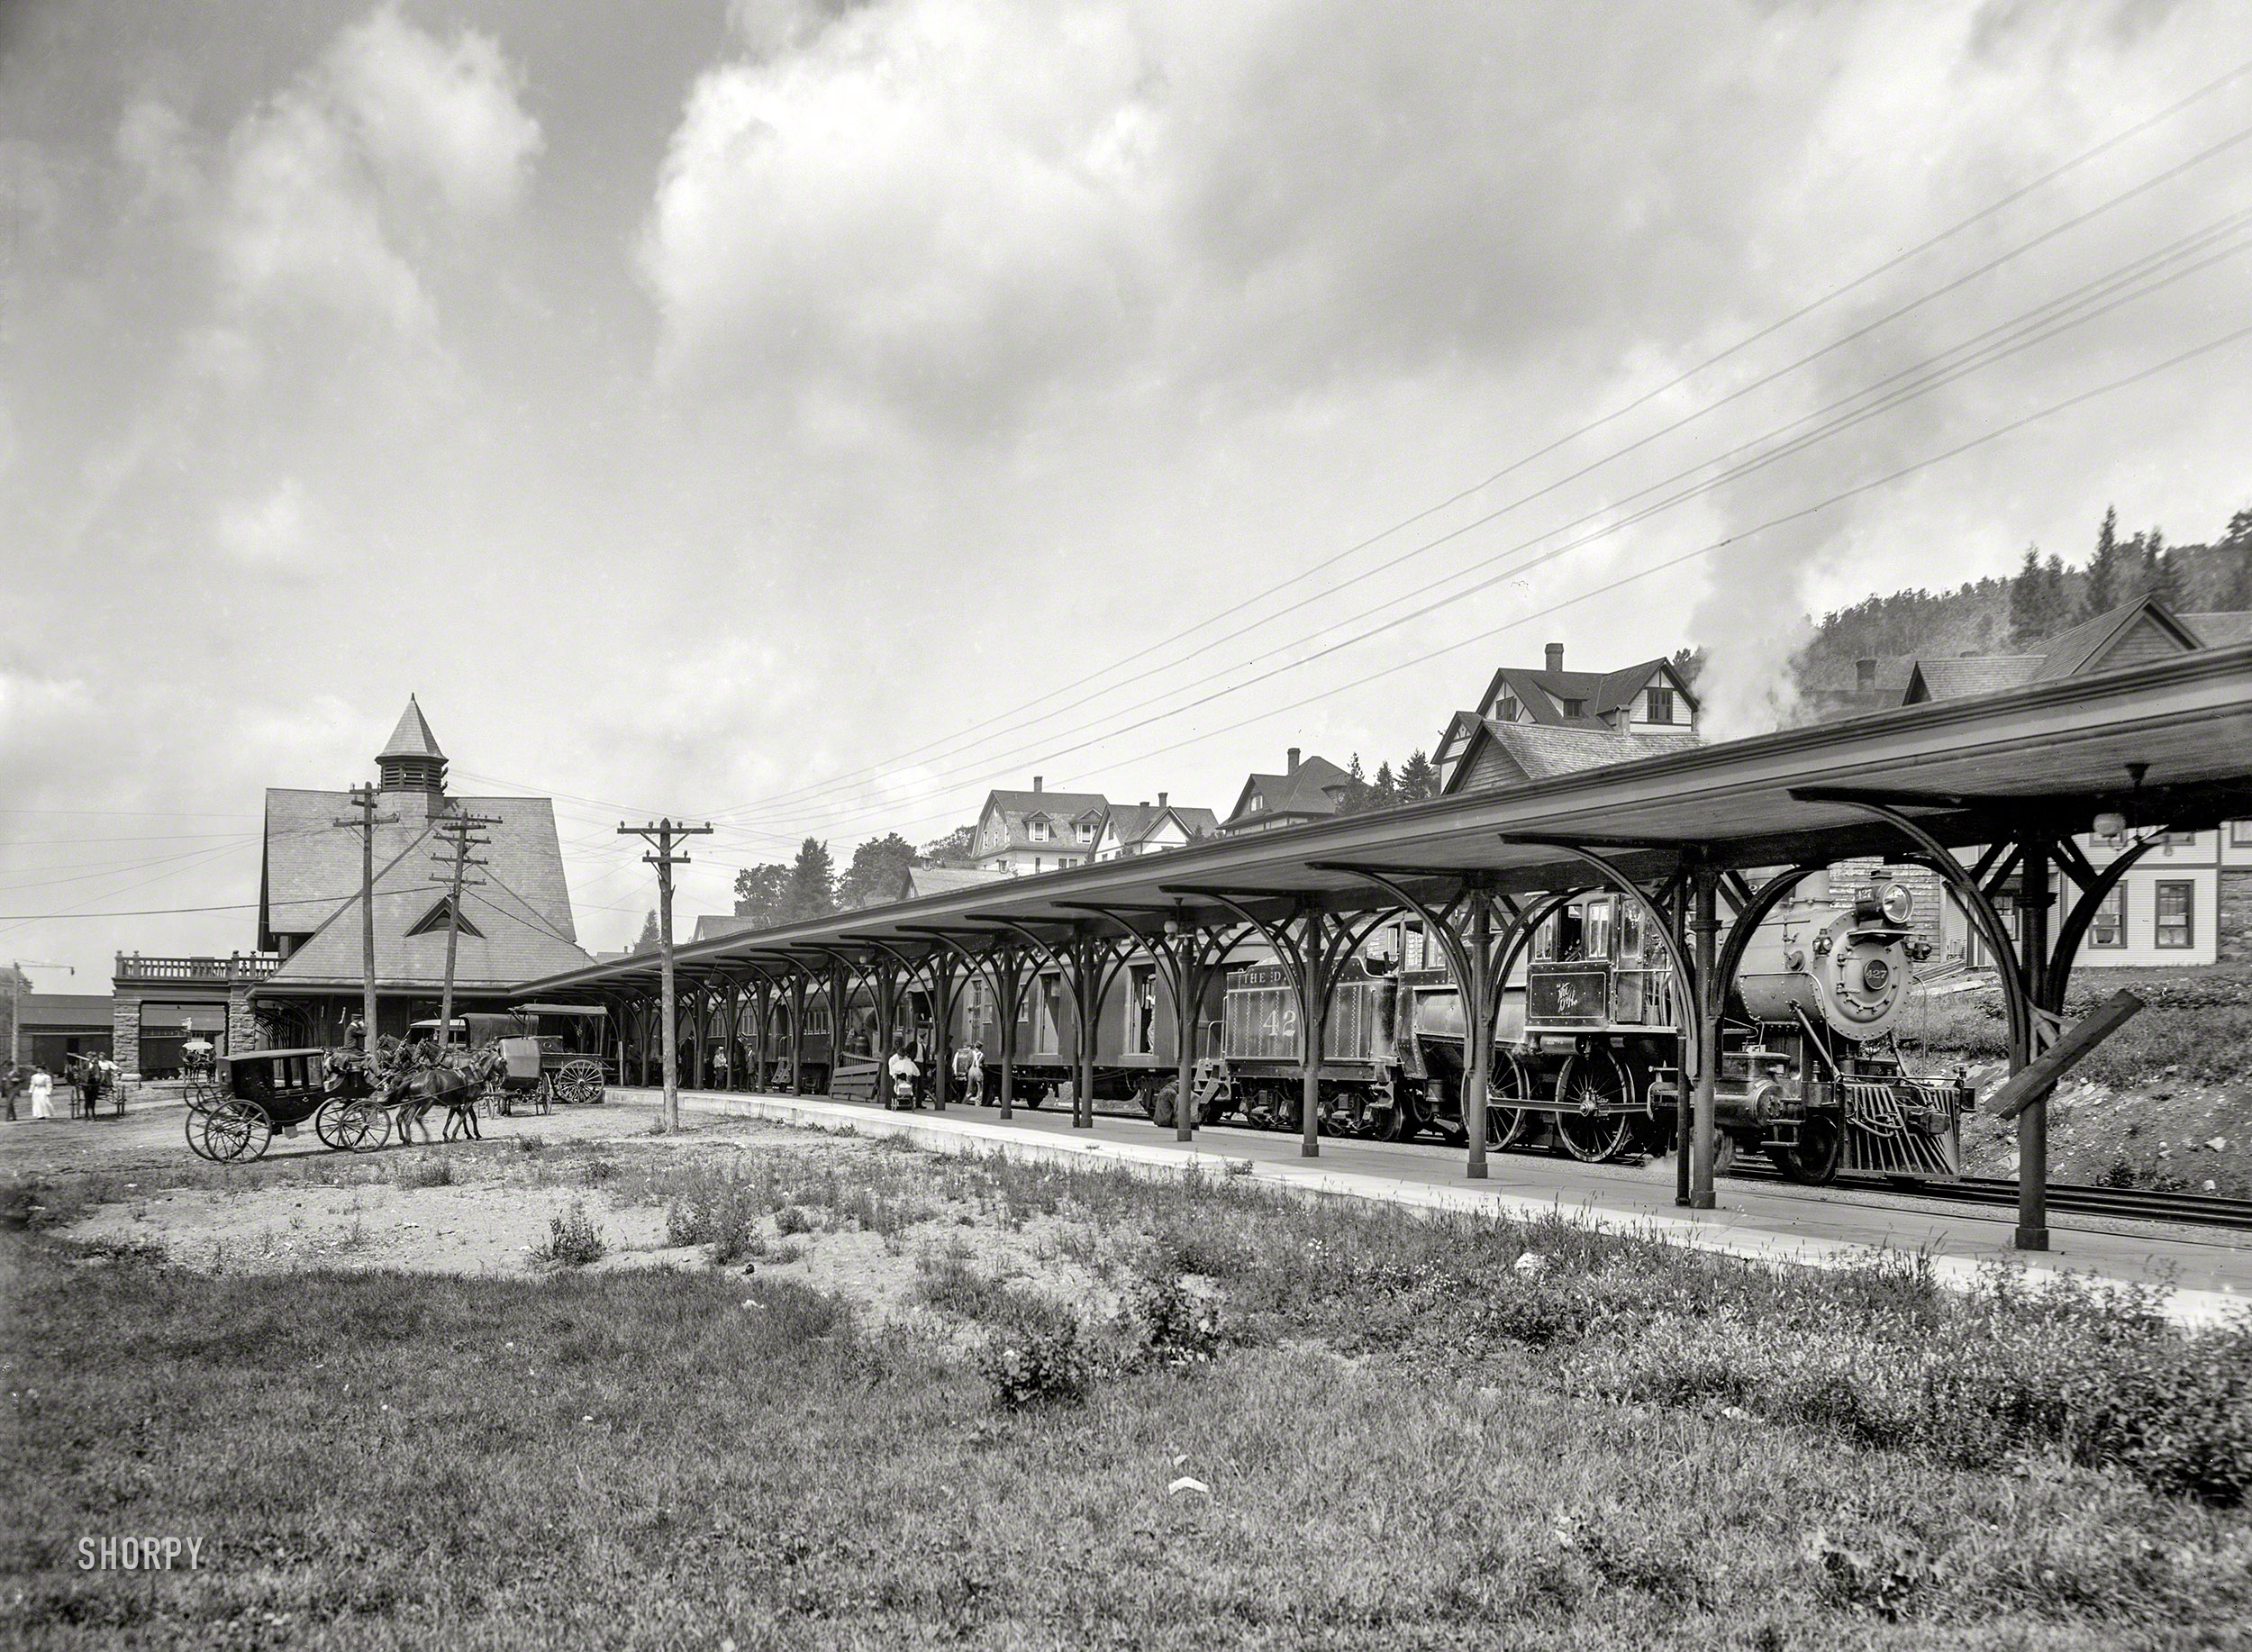 Circa 1905. "Saranac Lake central station, Adirondacks, N.Y." With a locomotive of the Delaware & Hudson Railway. 8x10 inch glass negative. View full size.